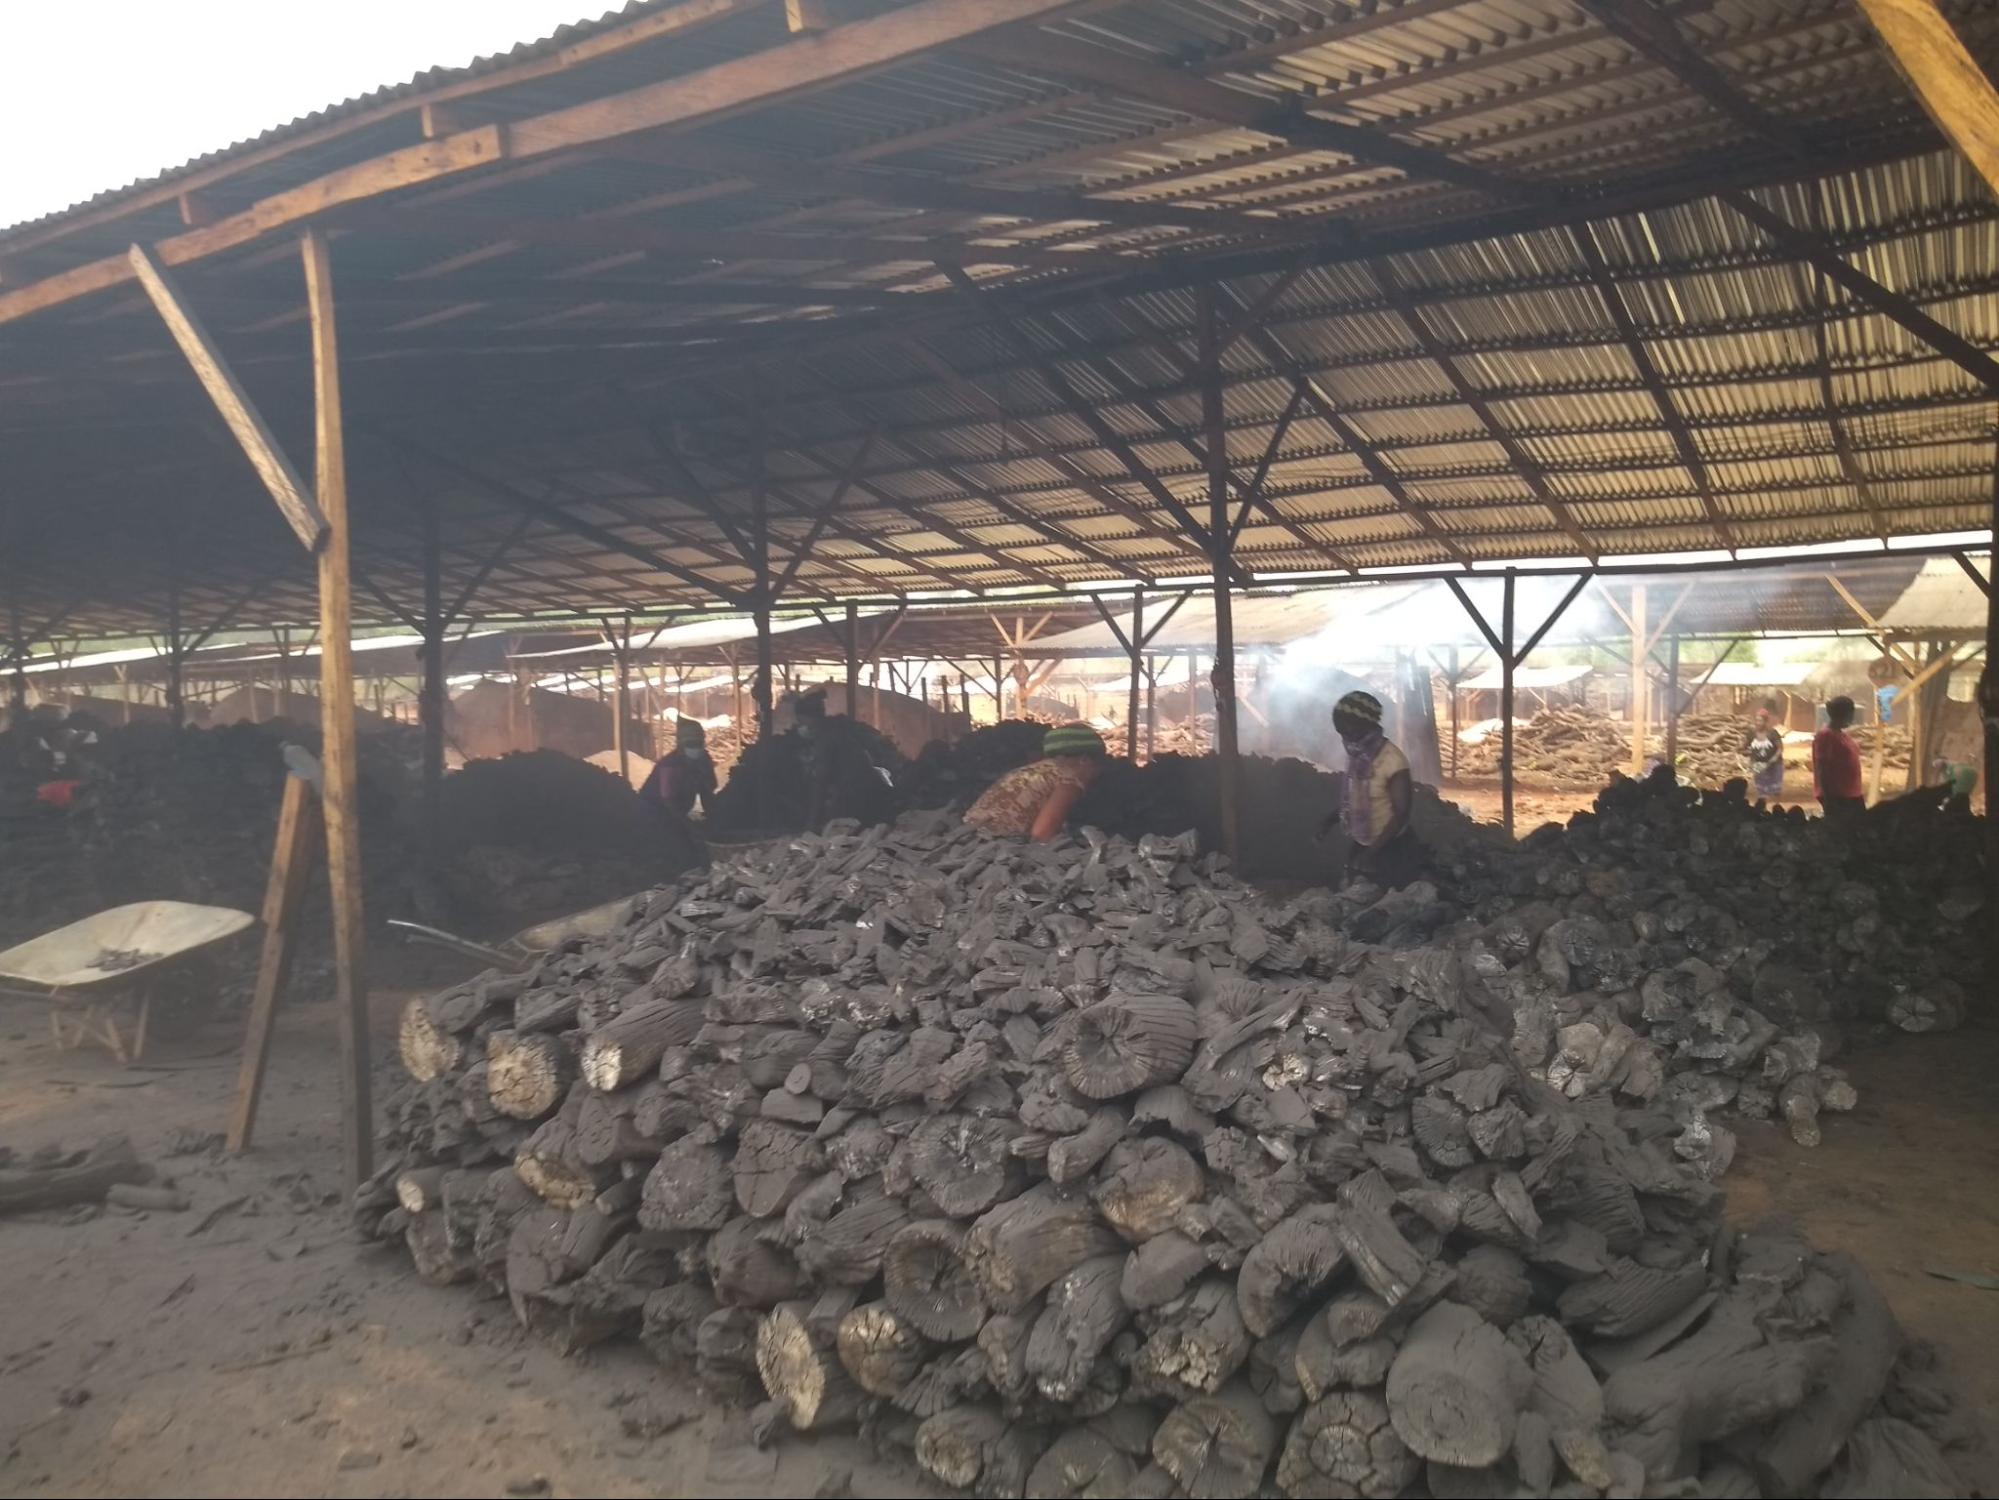  Logs of hardwood are burned in brick ovens to produce charcoal at the Chinese-run factory in Obimo.